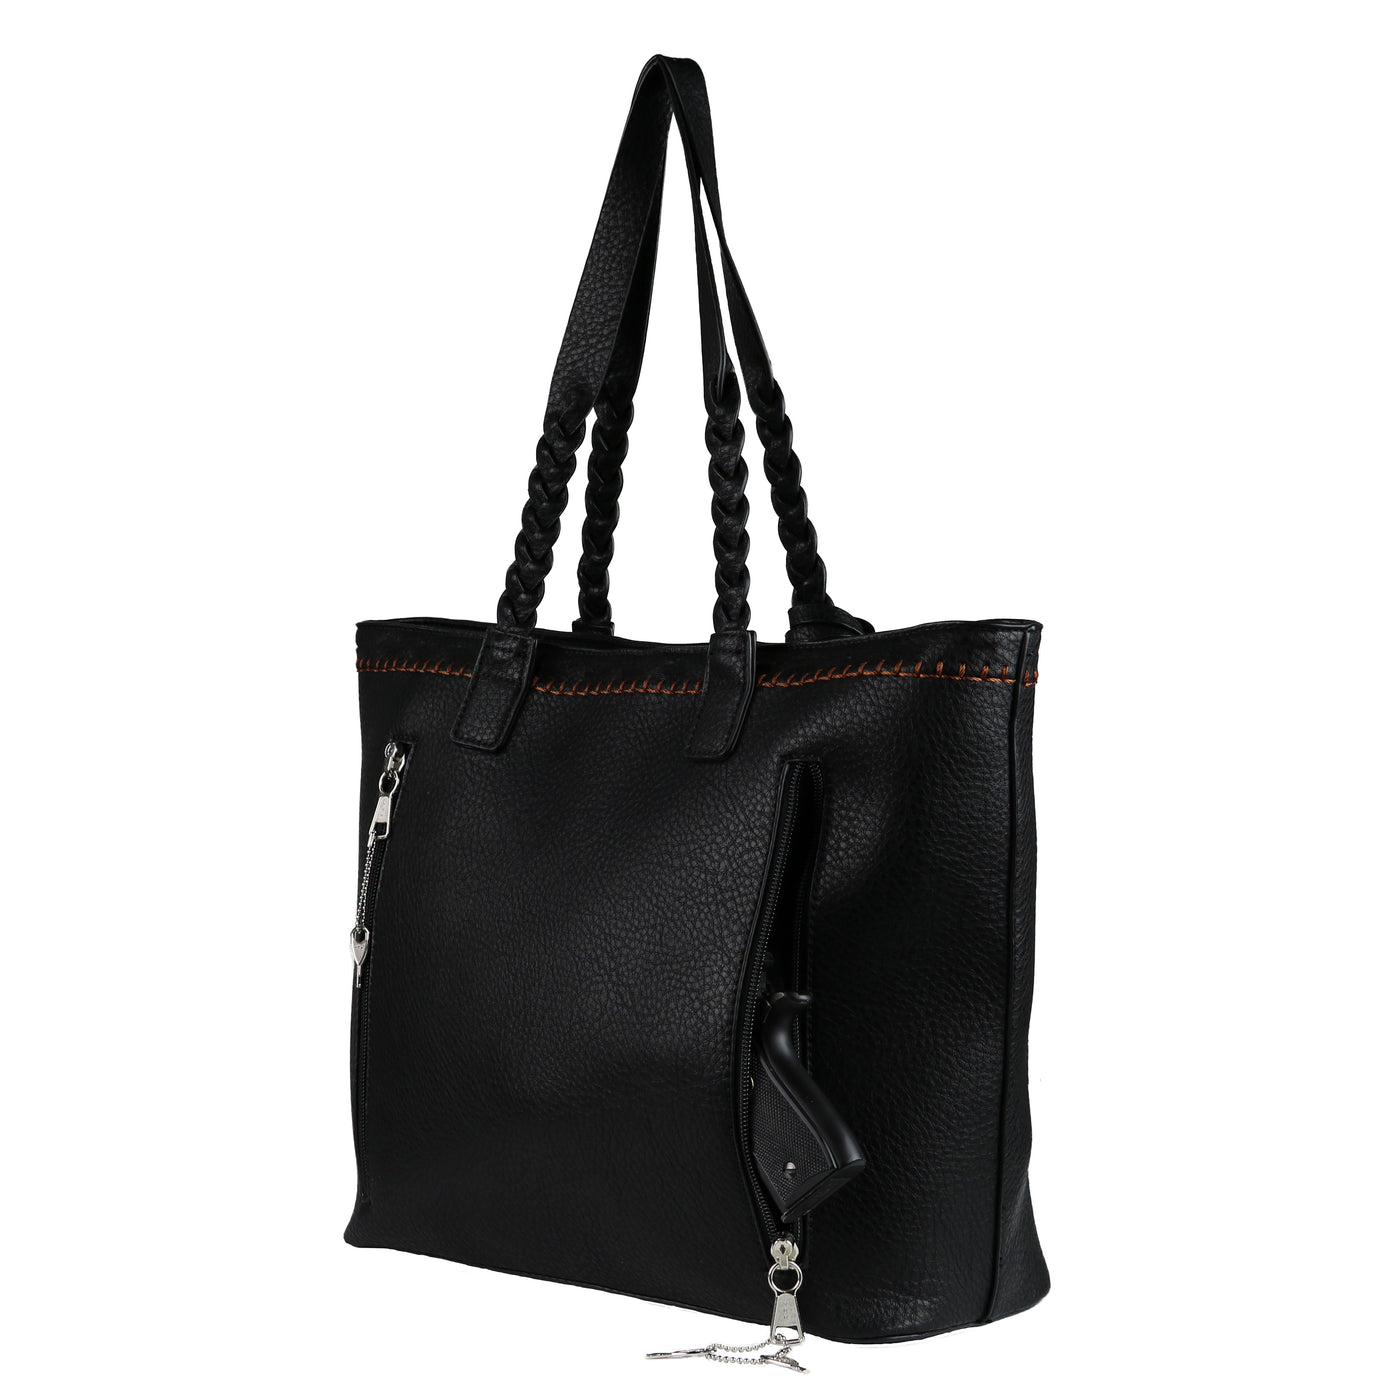 Concealed Carry Cora Tote by Lady Conceal